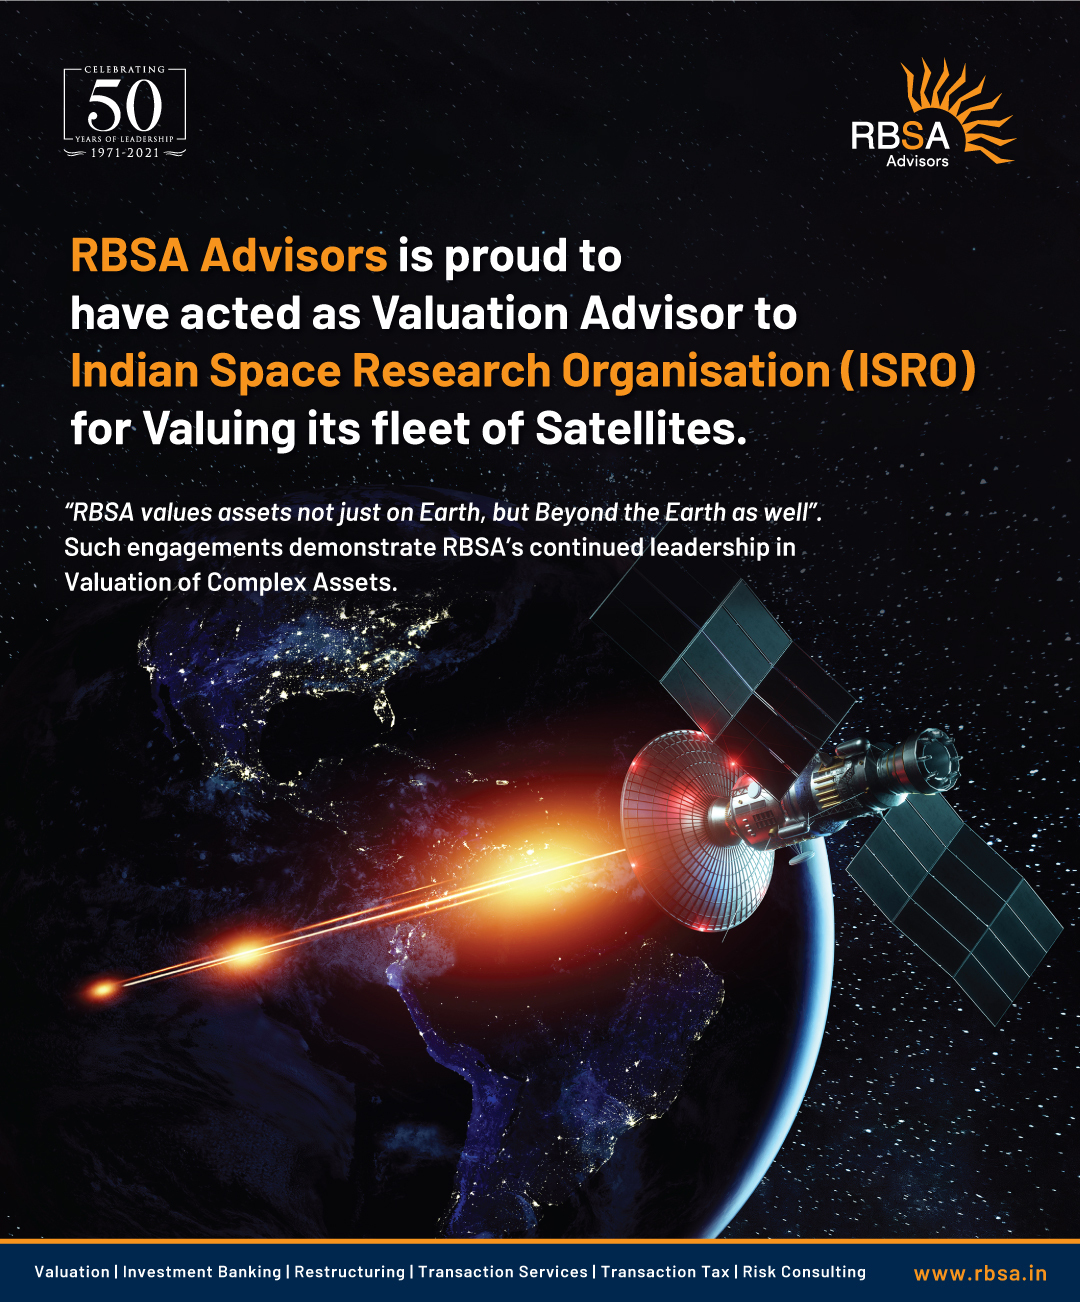 RBSA values assets not just on Earth, but Beyond the Earth as well